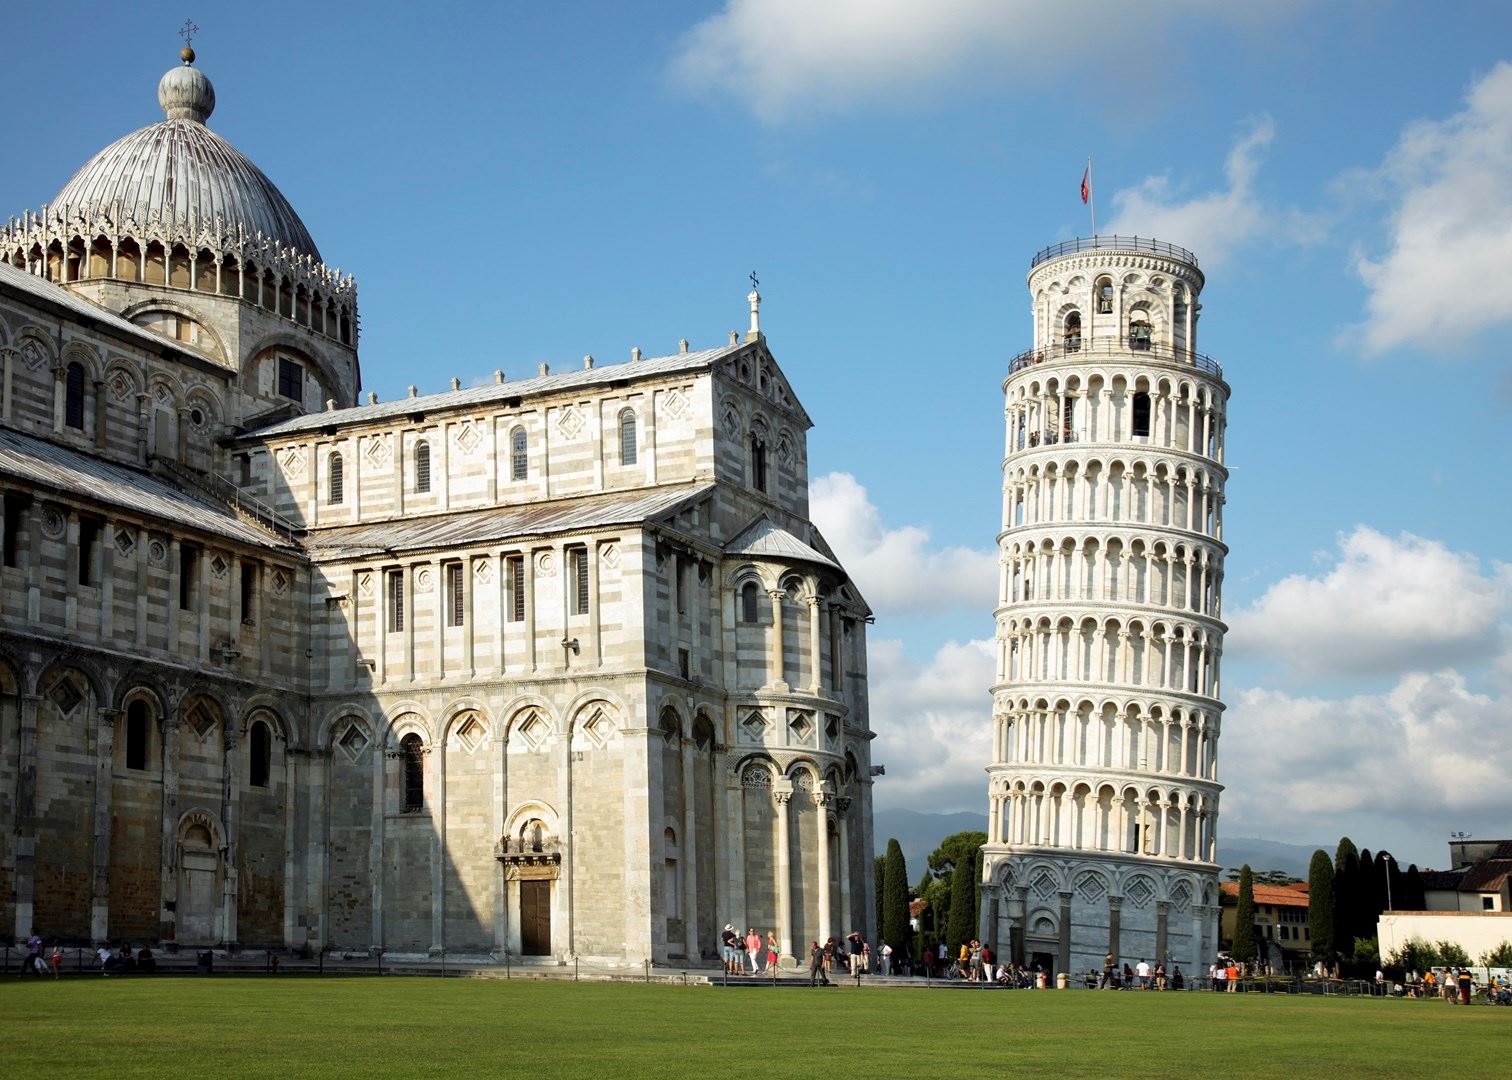 Tailor-made vacations to Pisa | Audley Travel